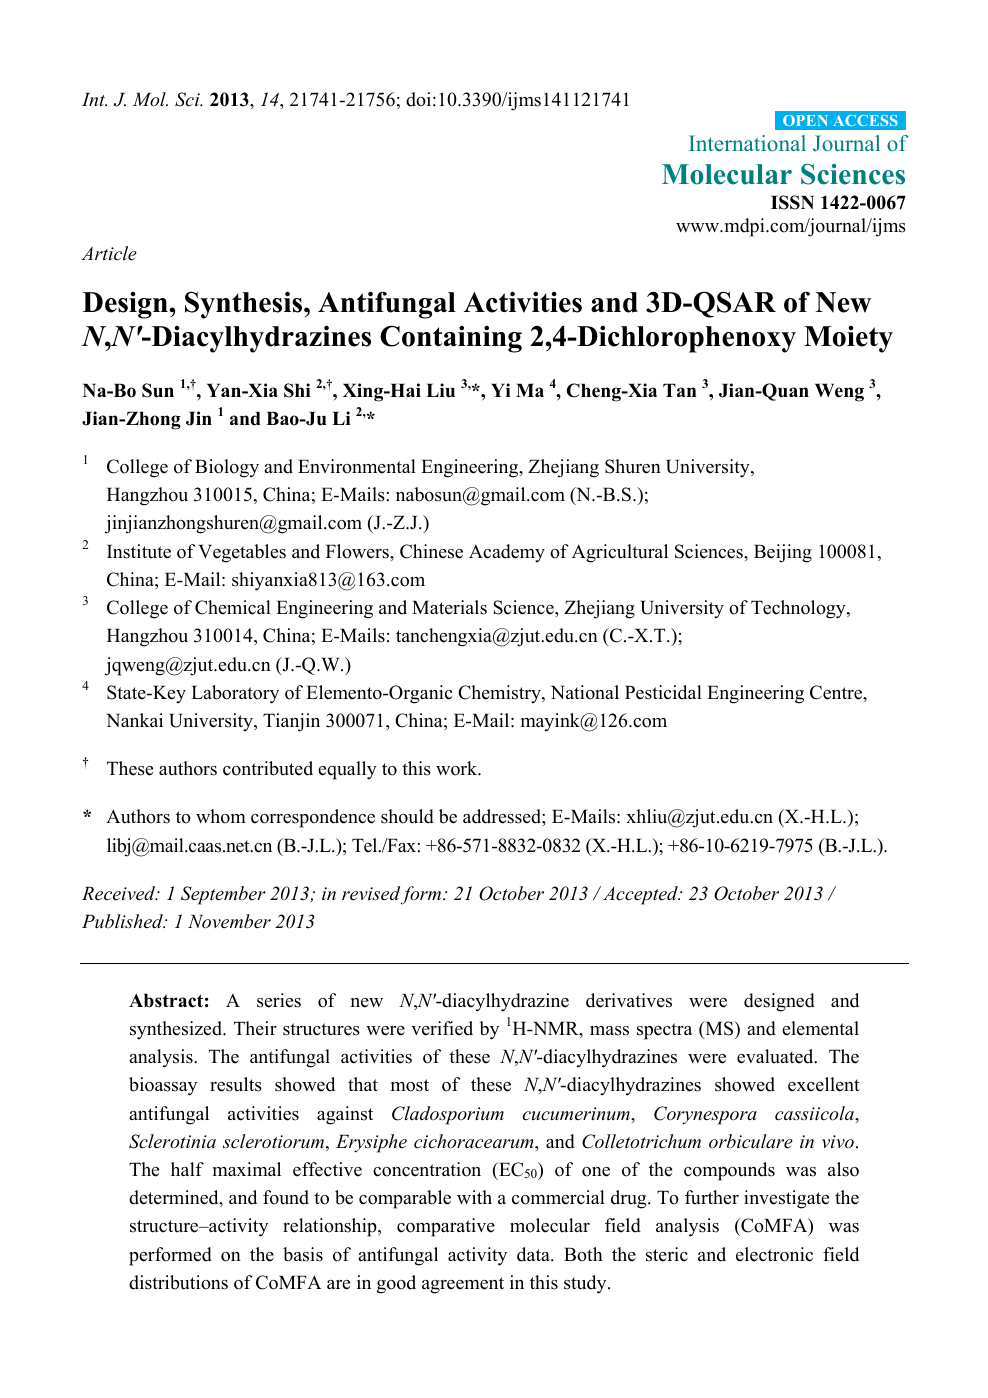 Design Synthesis Antifungal Activities And 3d Qsar Of New N N Diacylhydrazines Containing 2 4 Dichlorophenoxy Moiety Topic Of Research Paper In Chemical Sciences Download Scholarly Article Pdf And Read For Free On Cyberleninka Open Science